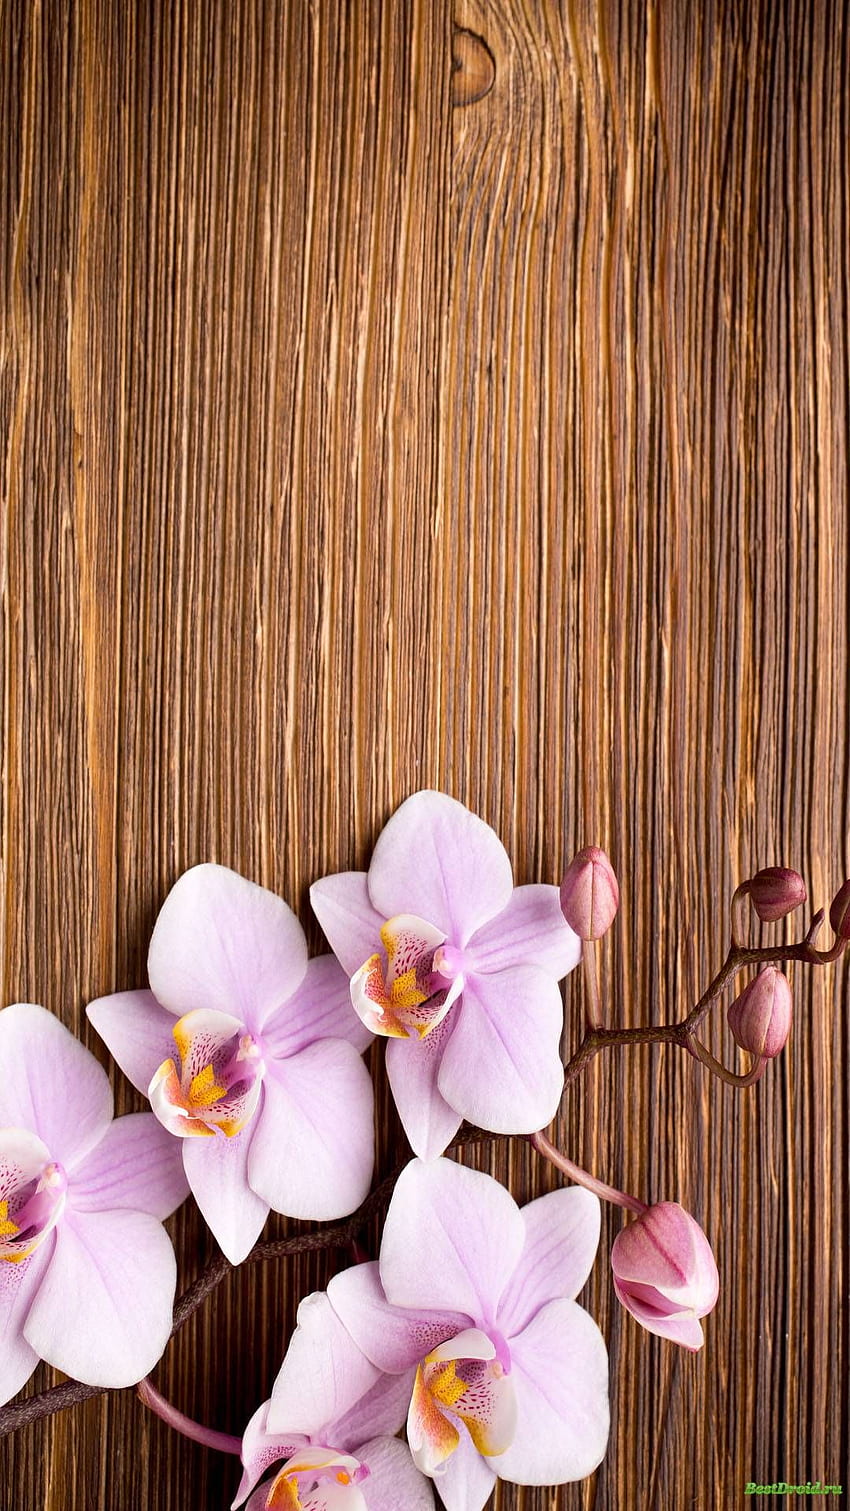 Orchid Photos Download The BEST Free Orchid Stock Photos  HD Images